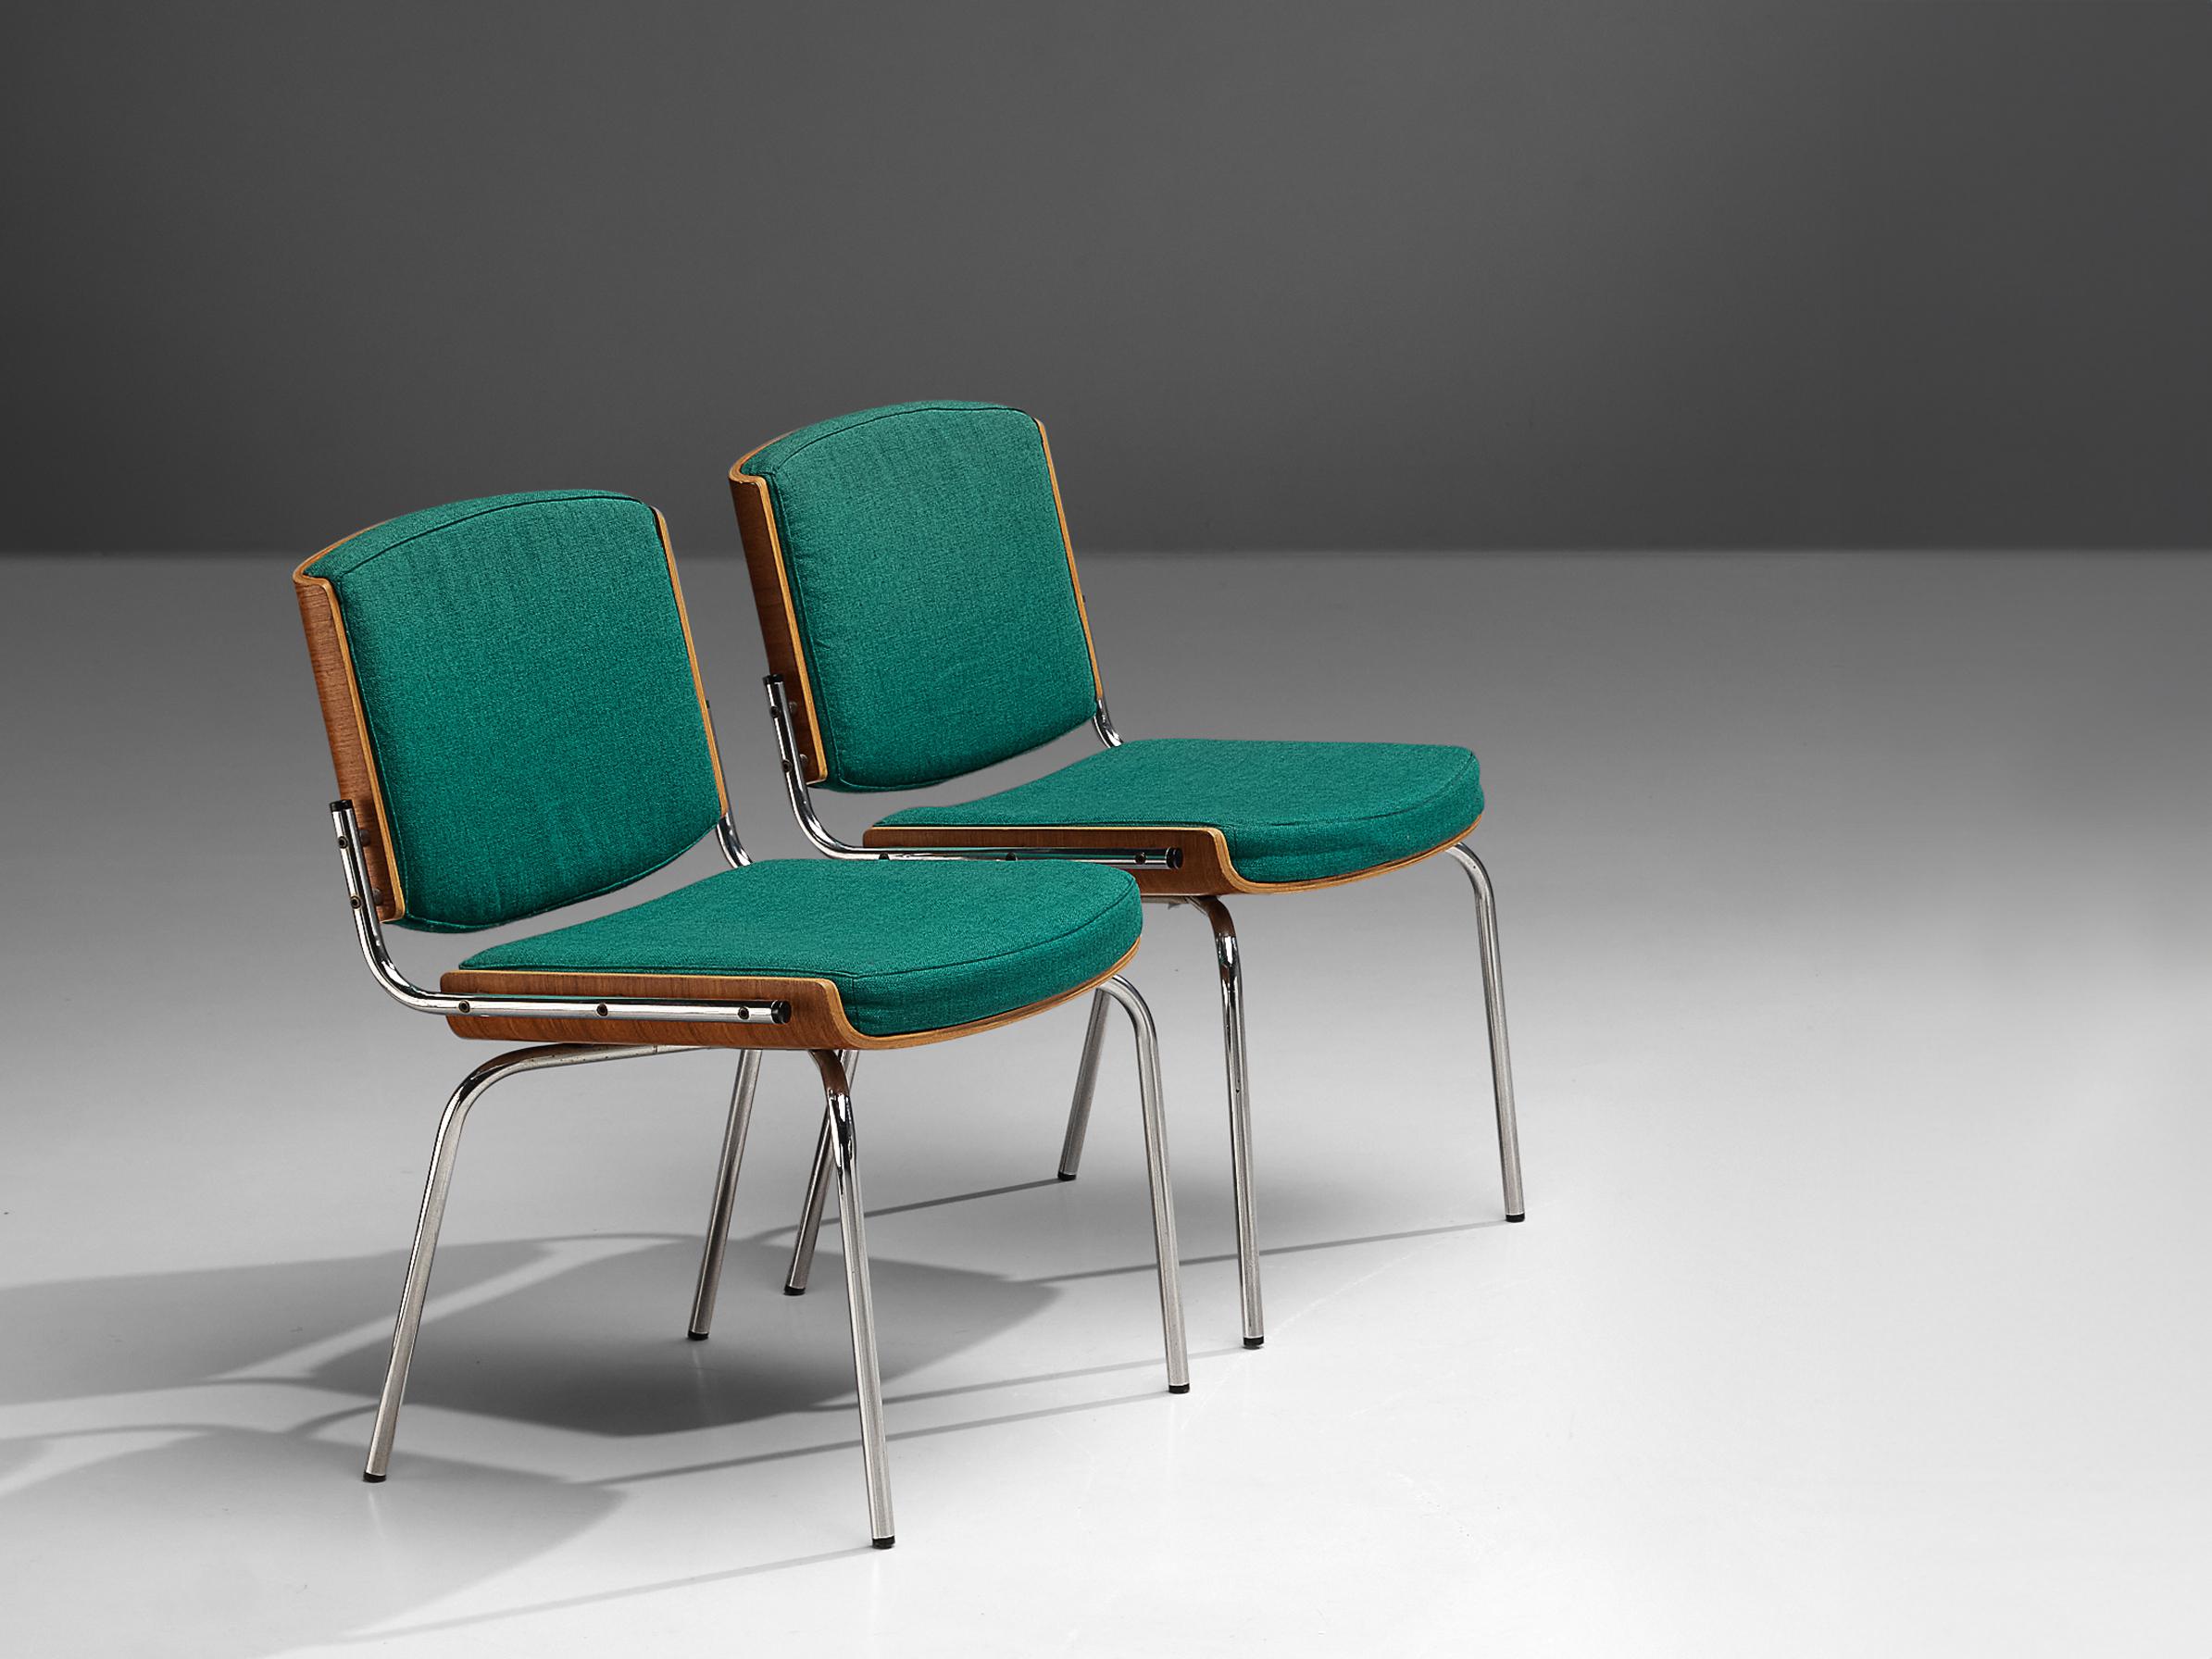 Duba, dining chairs, teak plywood, fabric, chrome-plated steel, Denmark, 1970s

Pair of Danish chairs manufactured by Duba. The design features a striking combination of materials and textures. The back of the backrest and frame of the seat are made